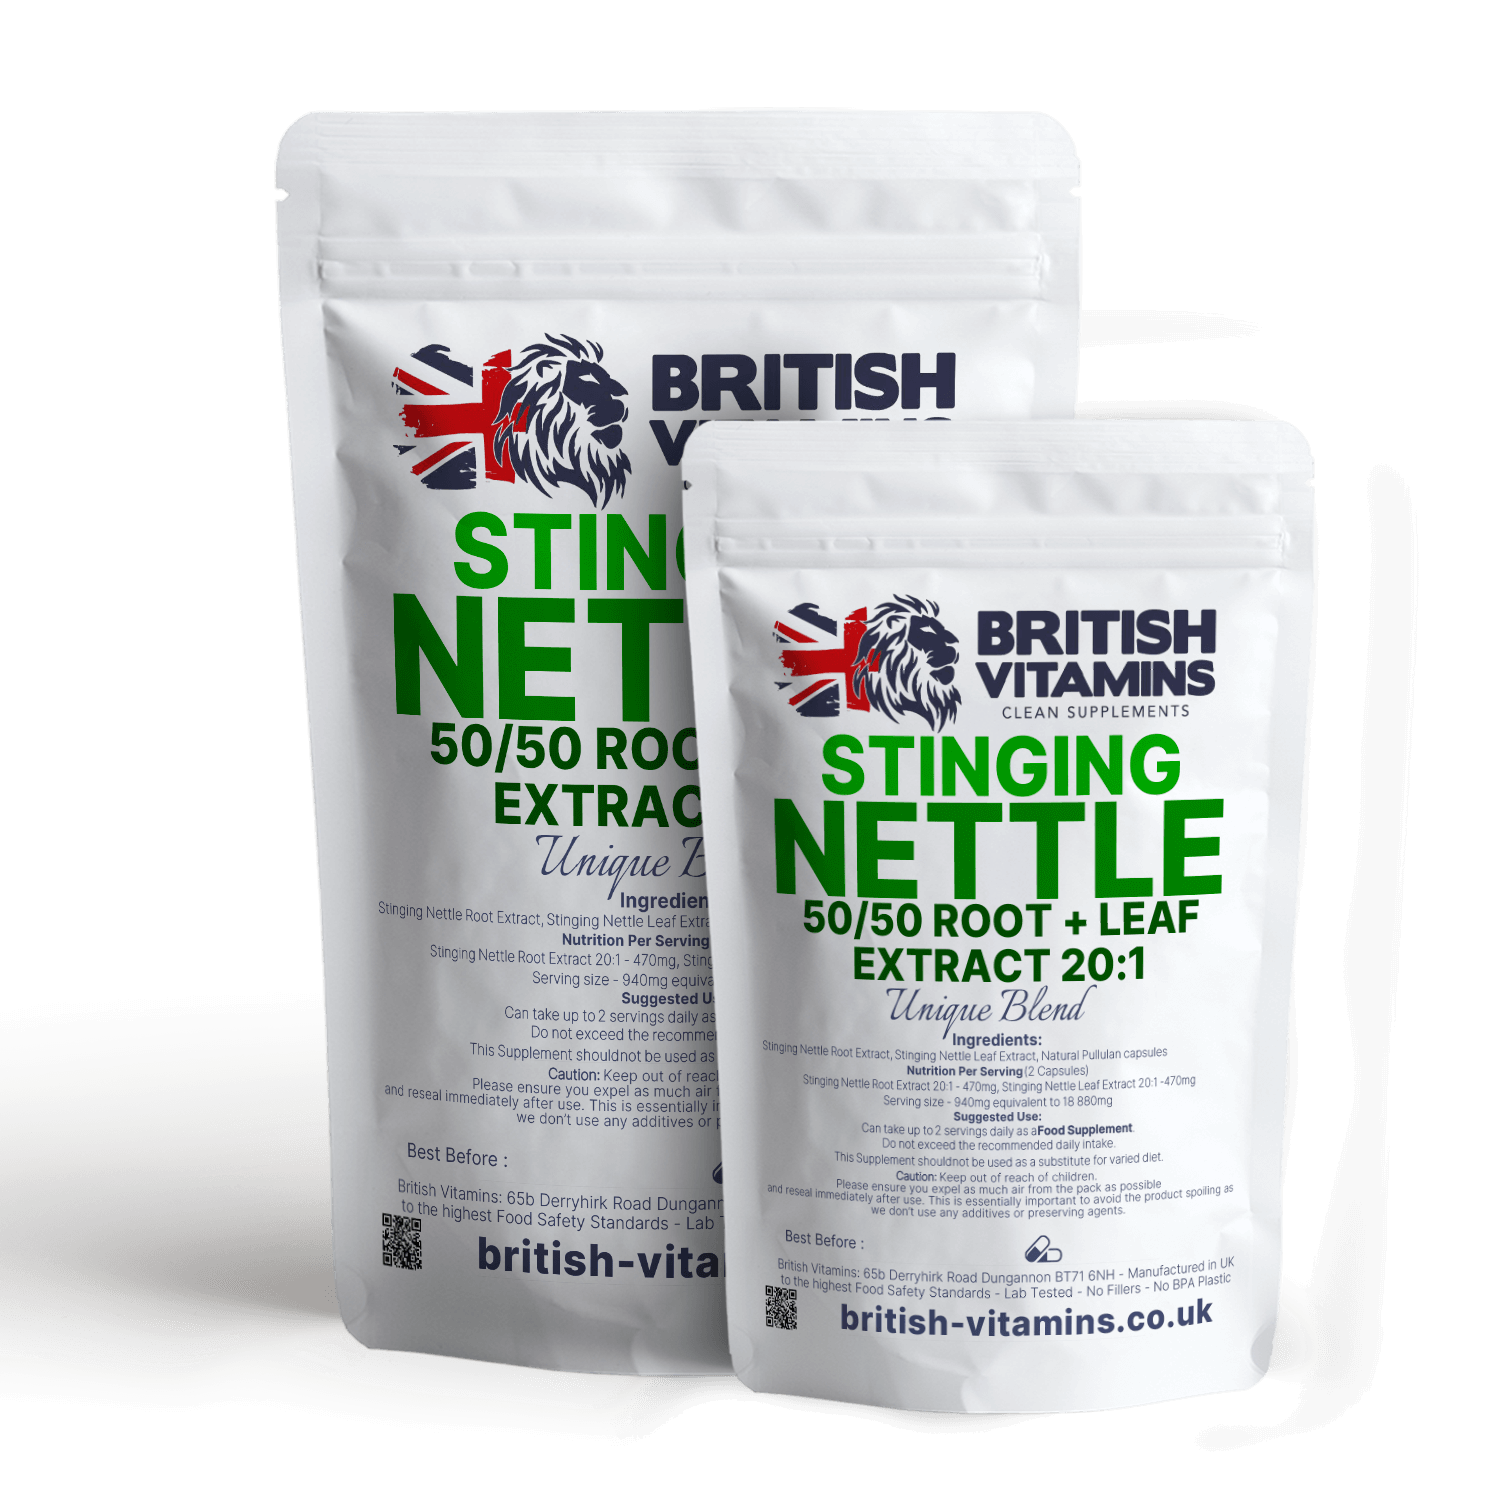 Stinging Nettle Leaf 20:1 Extract 940mg Vegan Natural 50/50 leaf & root capsules Health & Beauty:Vitamins & Lifestyle Supplements:Vitamins & Minerals British Vitamins 5 Capsules ( Sample )  